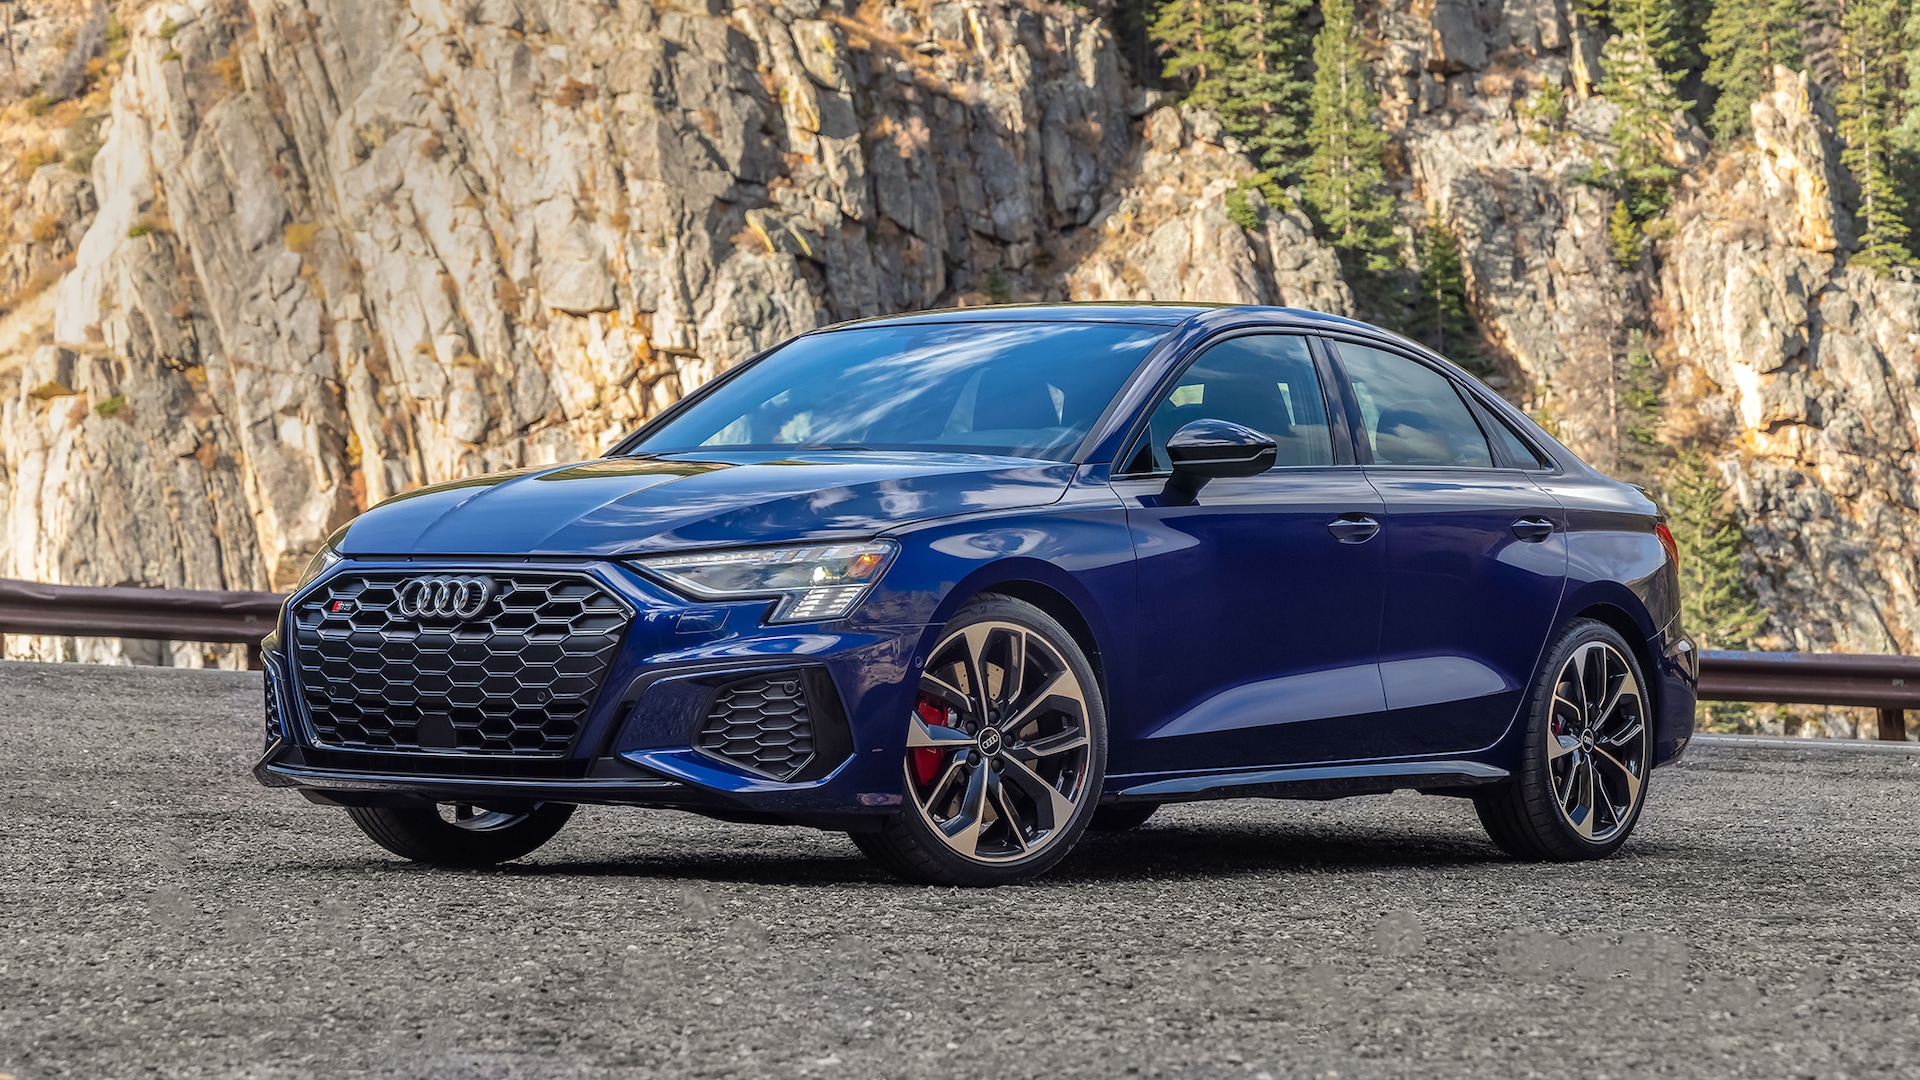 2022 Audi S3 Prices, Reviews, and Photos - MotorTrend